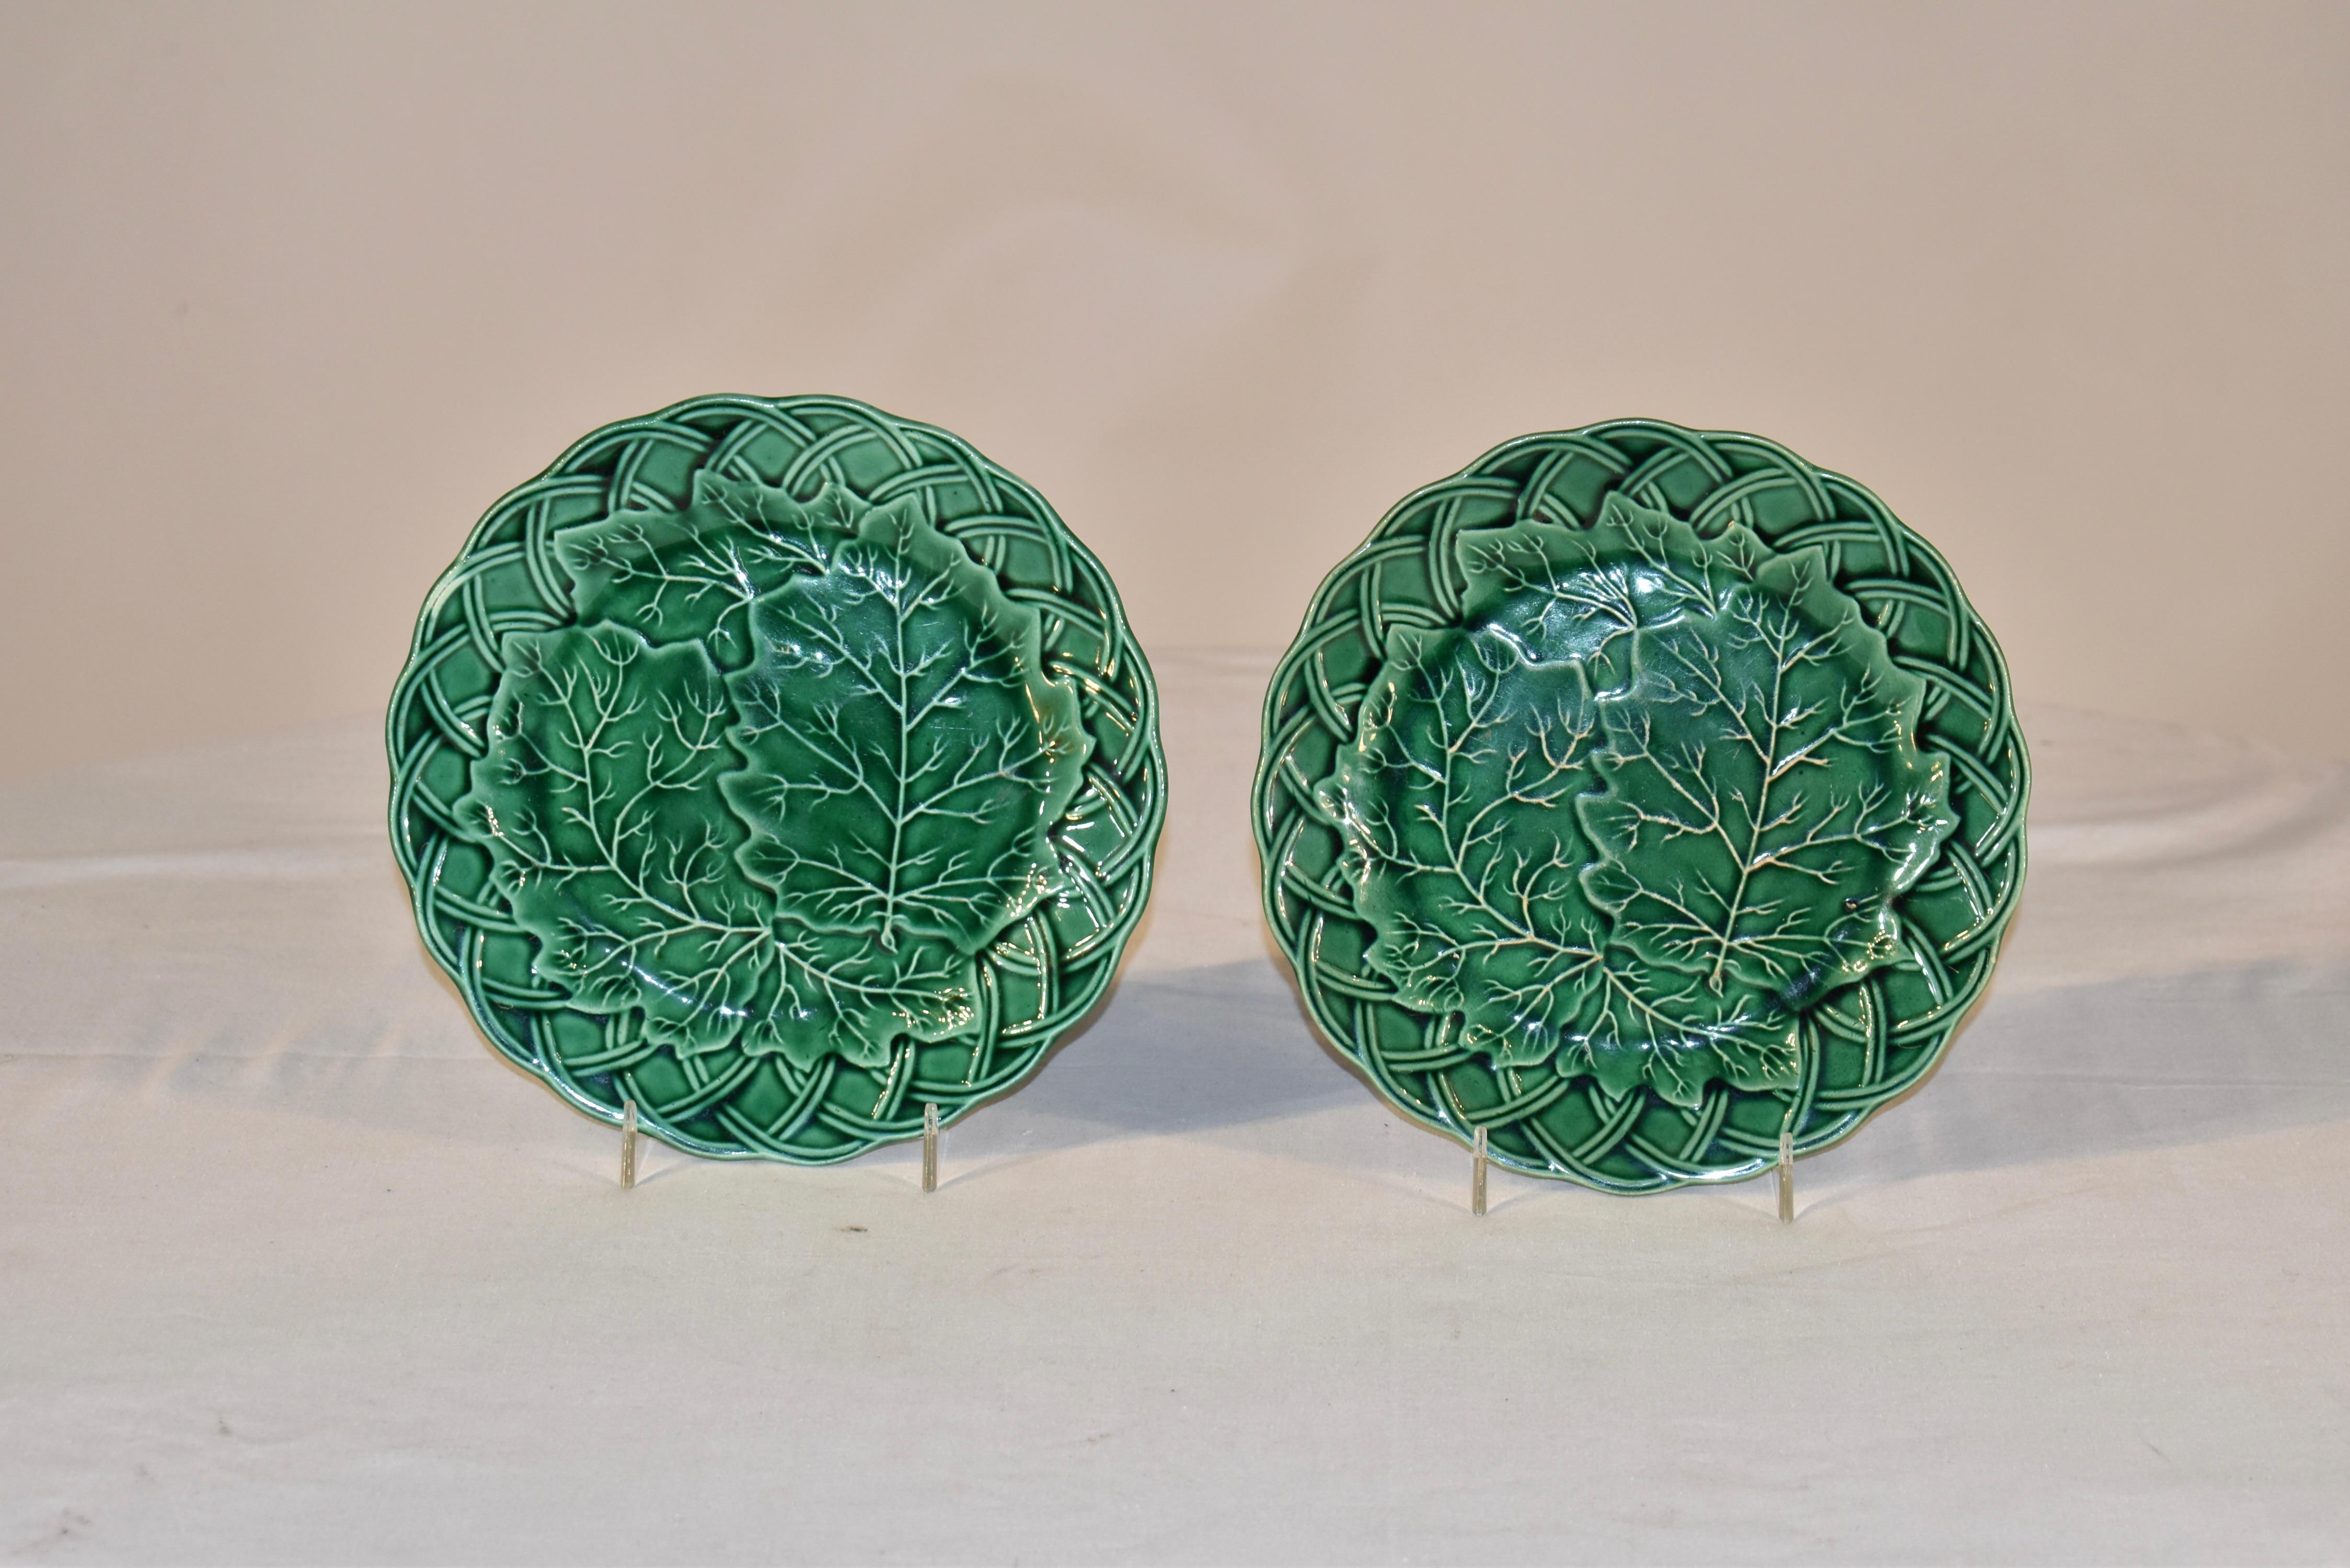 Pair of 19th century green glazed Majolica plates from England. They have a nicely relieved pressing of a basket weave border, surrounding a central large leaf pattern. They are glazed in a rich shade of green and would be a lovely addition to any